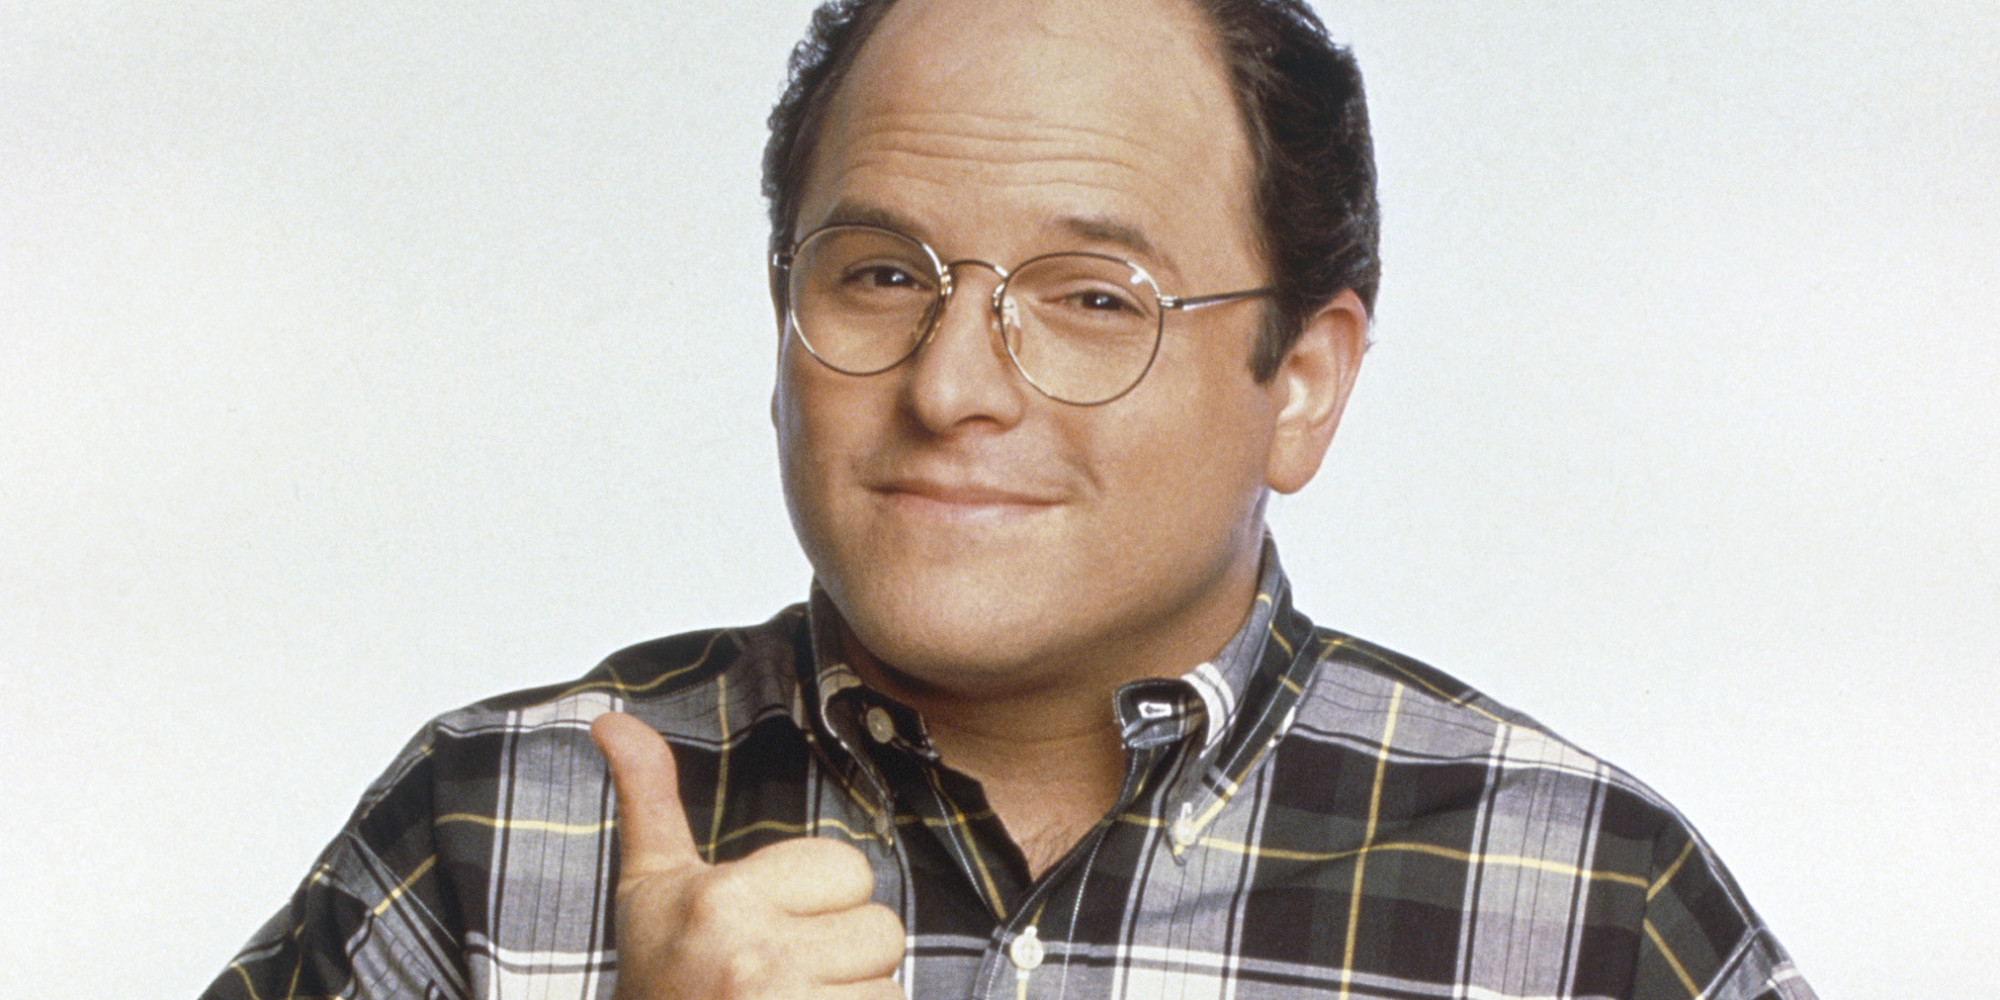 What Can You Learn About Selling From George Costanza